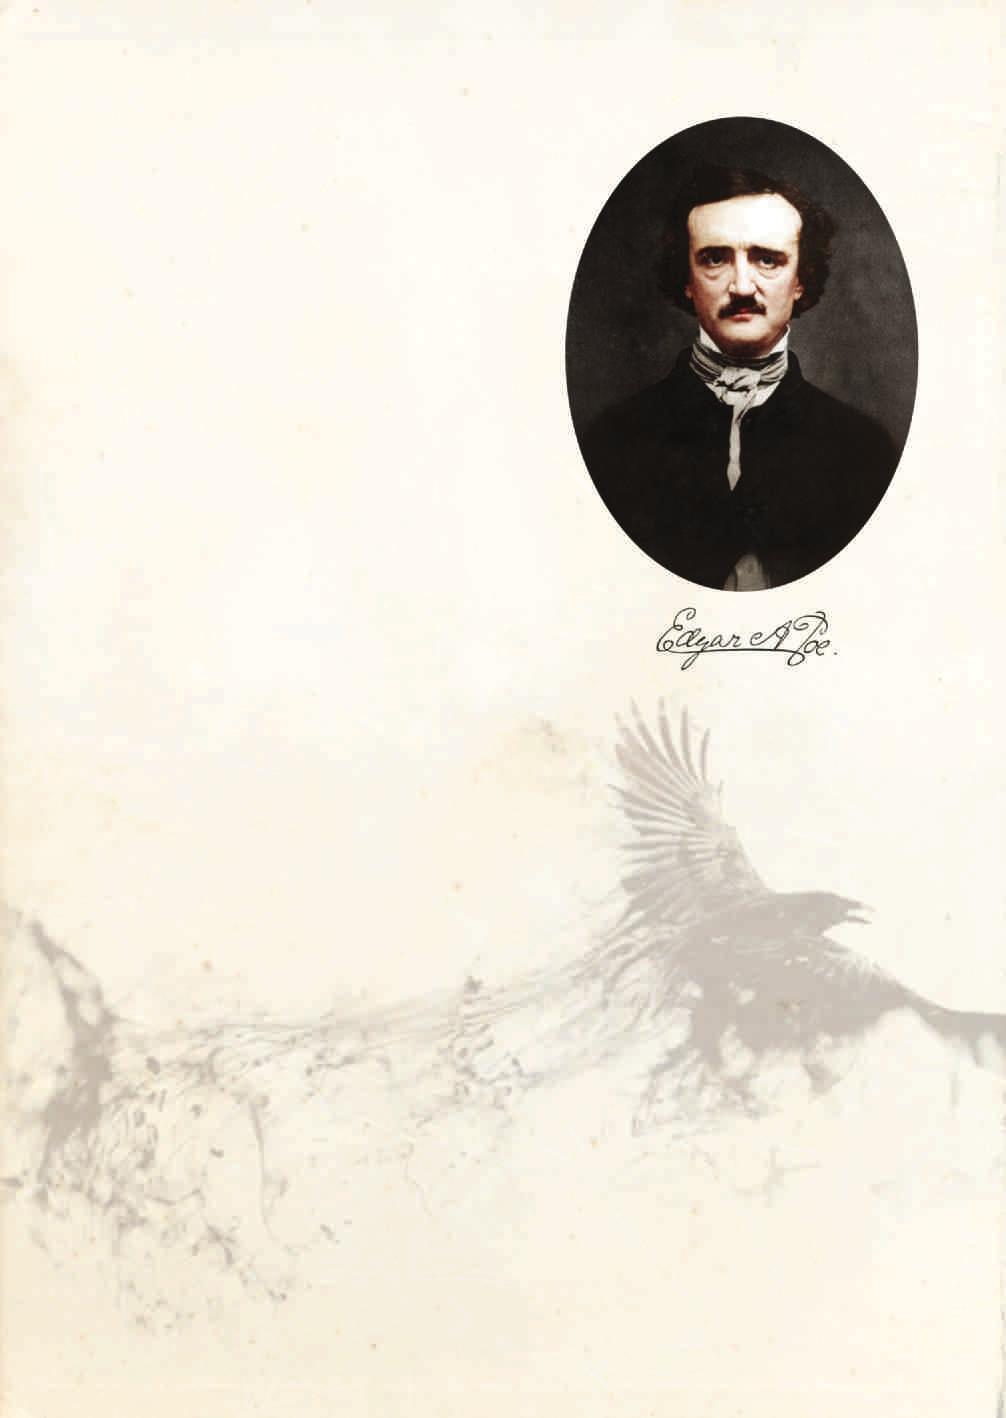 12 Língua Inglesa About the Author - Edgar Allan Poe (1809-1849) Poet, critic, writer of prose - tales, Allan Poe had fame and influence first in France and only later in America and Britain.